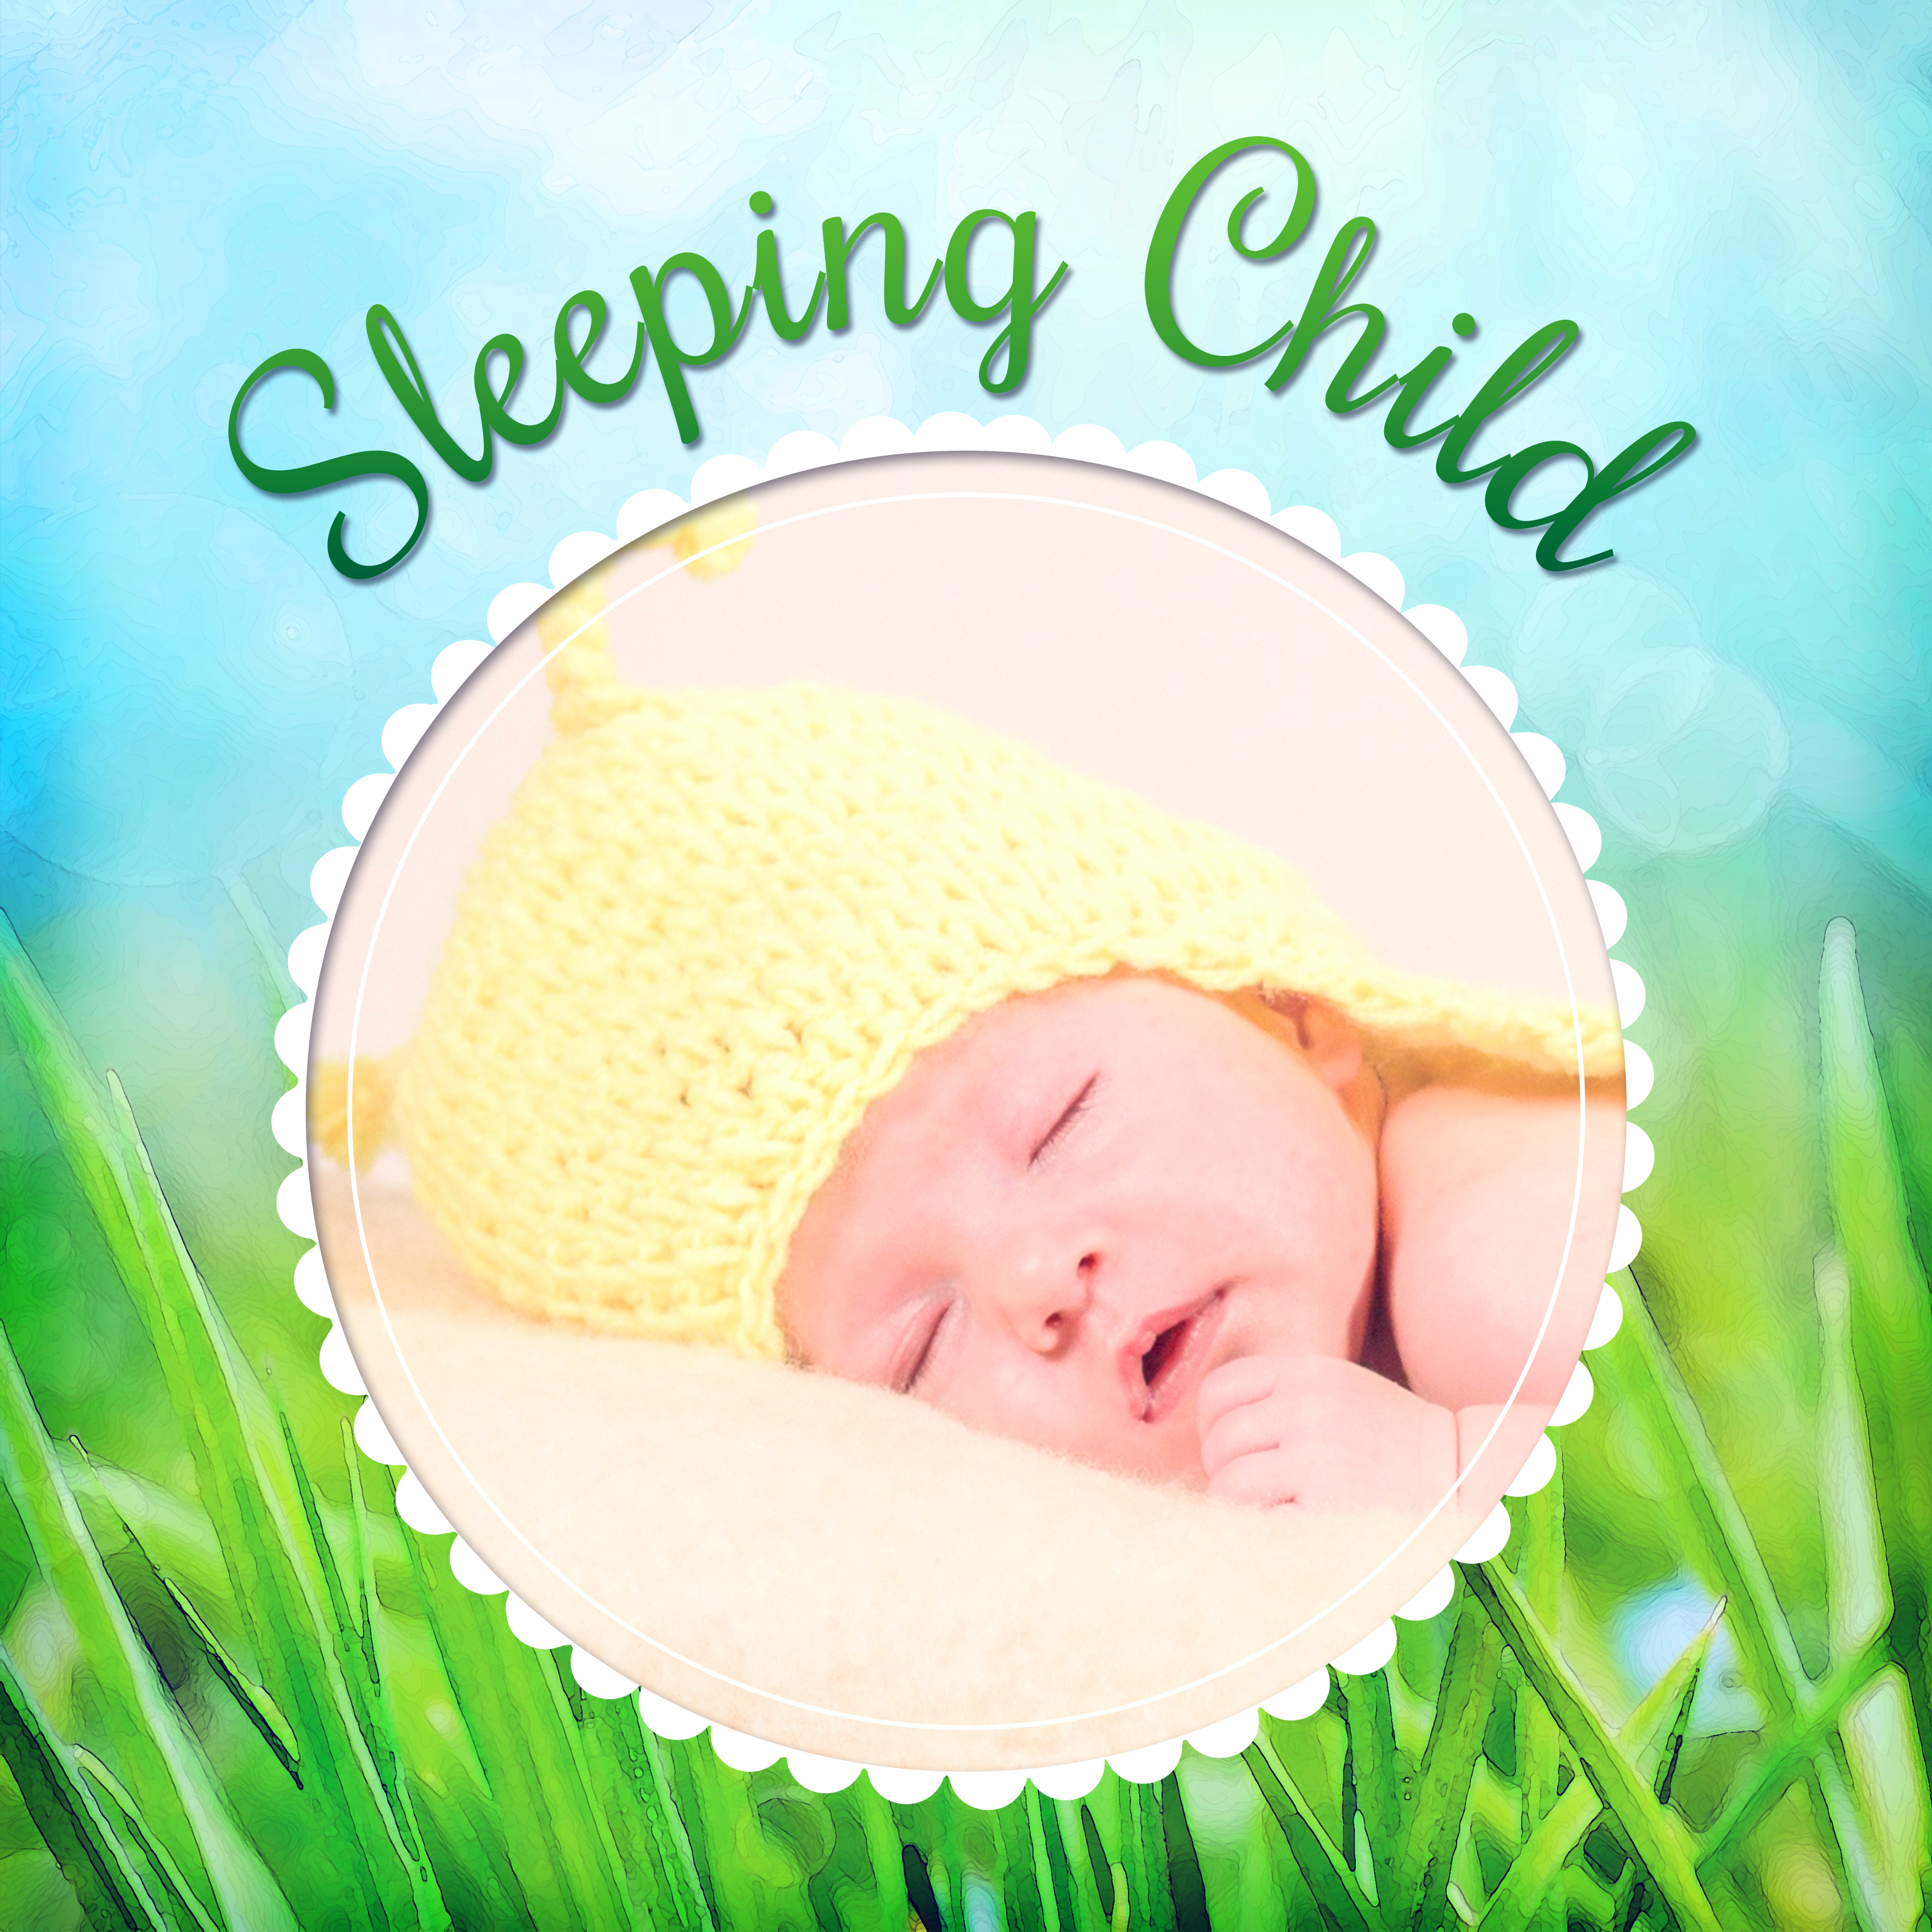 Sleeping Child - Sweet Kid, Nice Youngster, Time to Bed, Bedtime